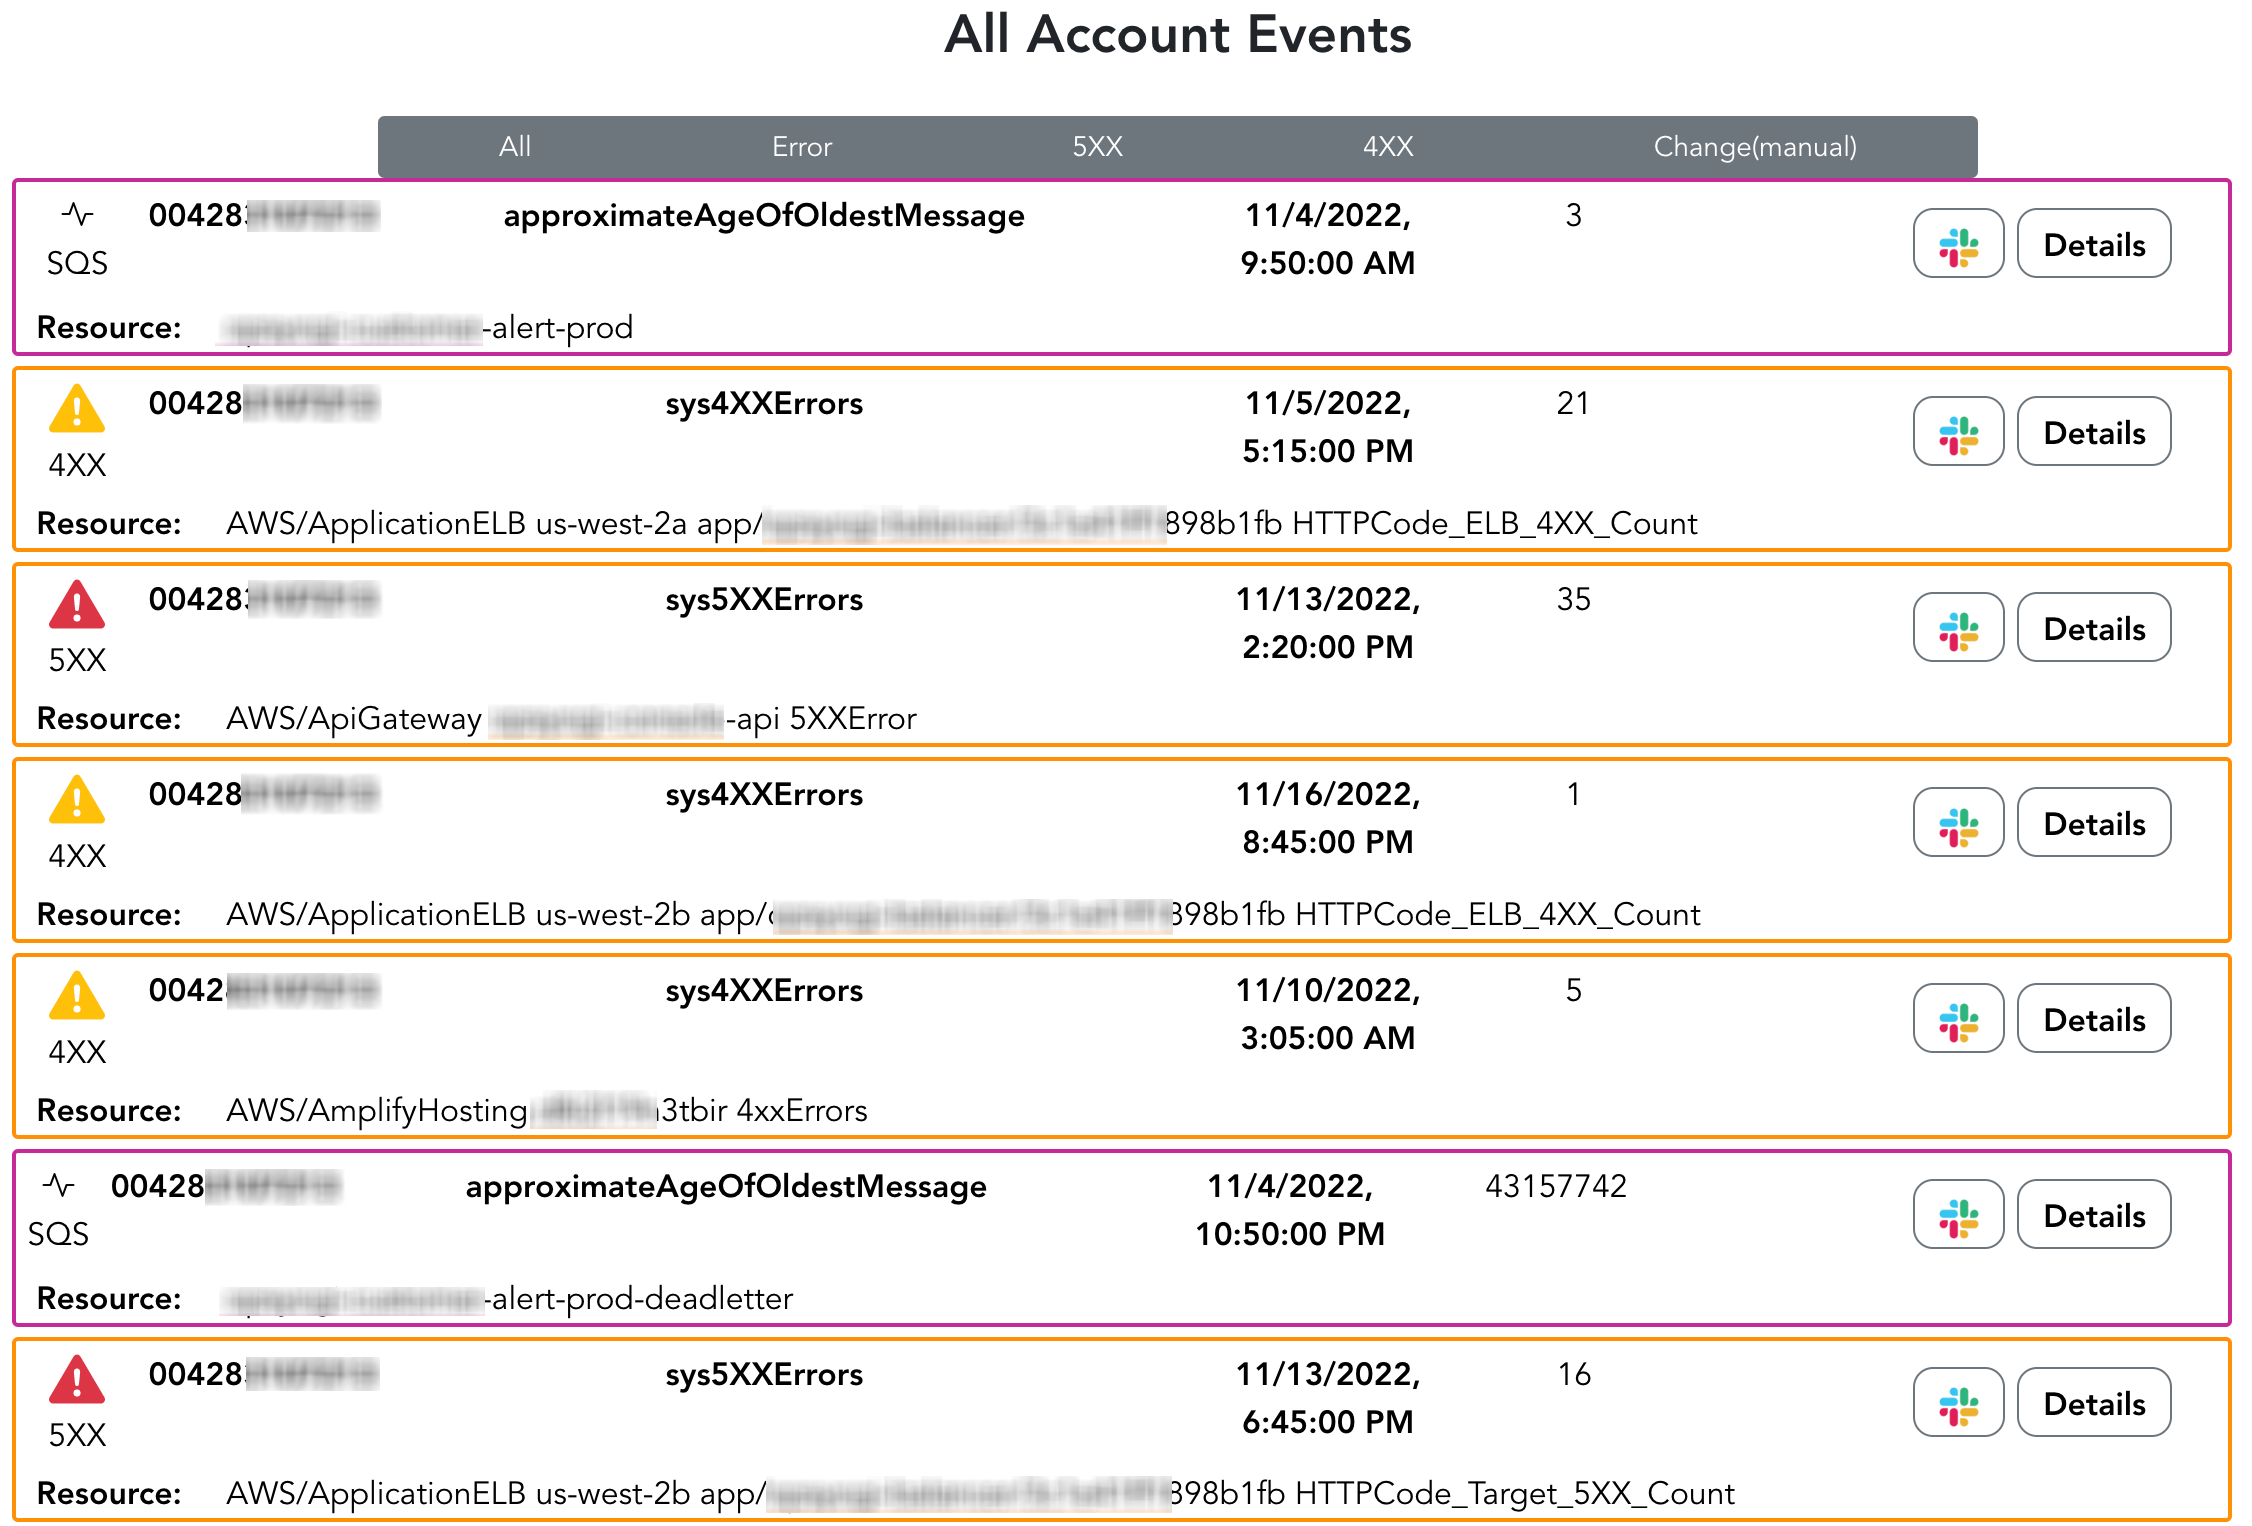 Team often miss critical low level alarms in their applications or fail to send them to platforms like DataDog or Splunk. OpsYogi gathers metrics from the cloud and alerts on anomolous error behavior. Be alerted to issues as they happen.